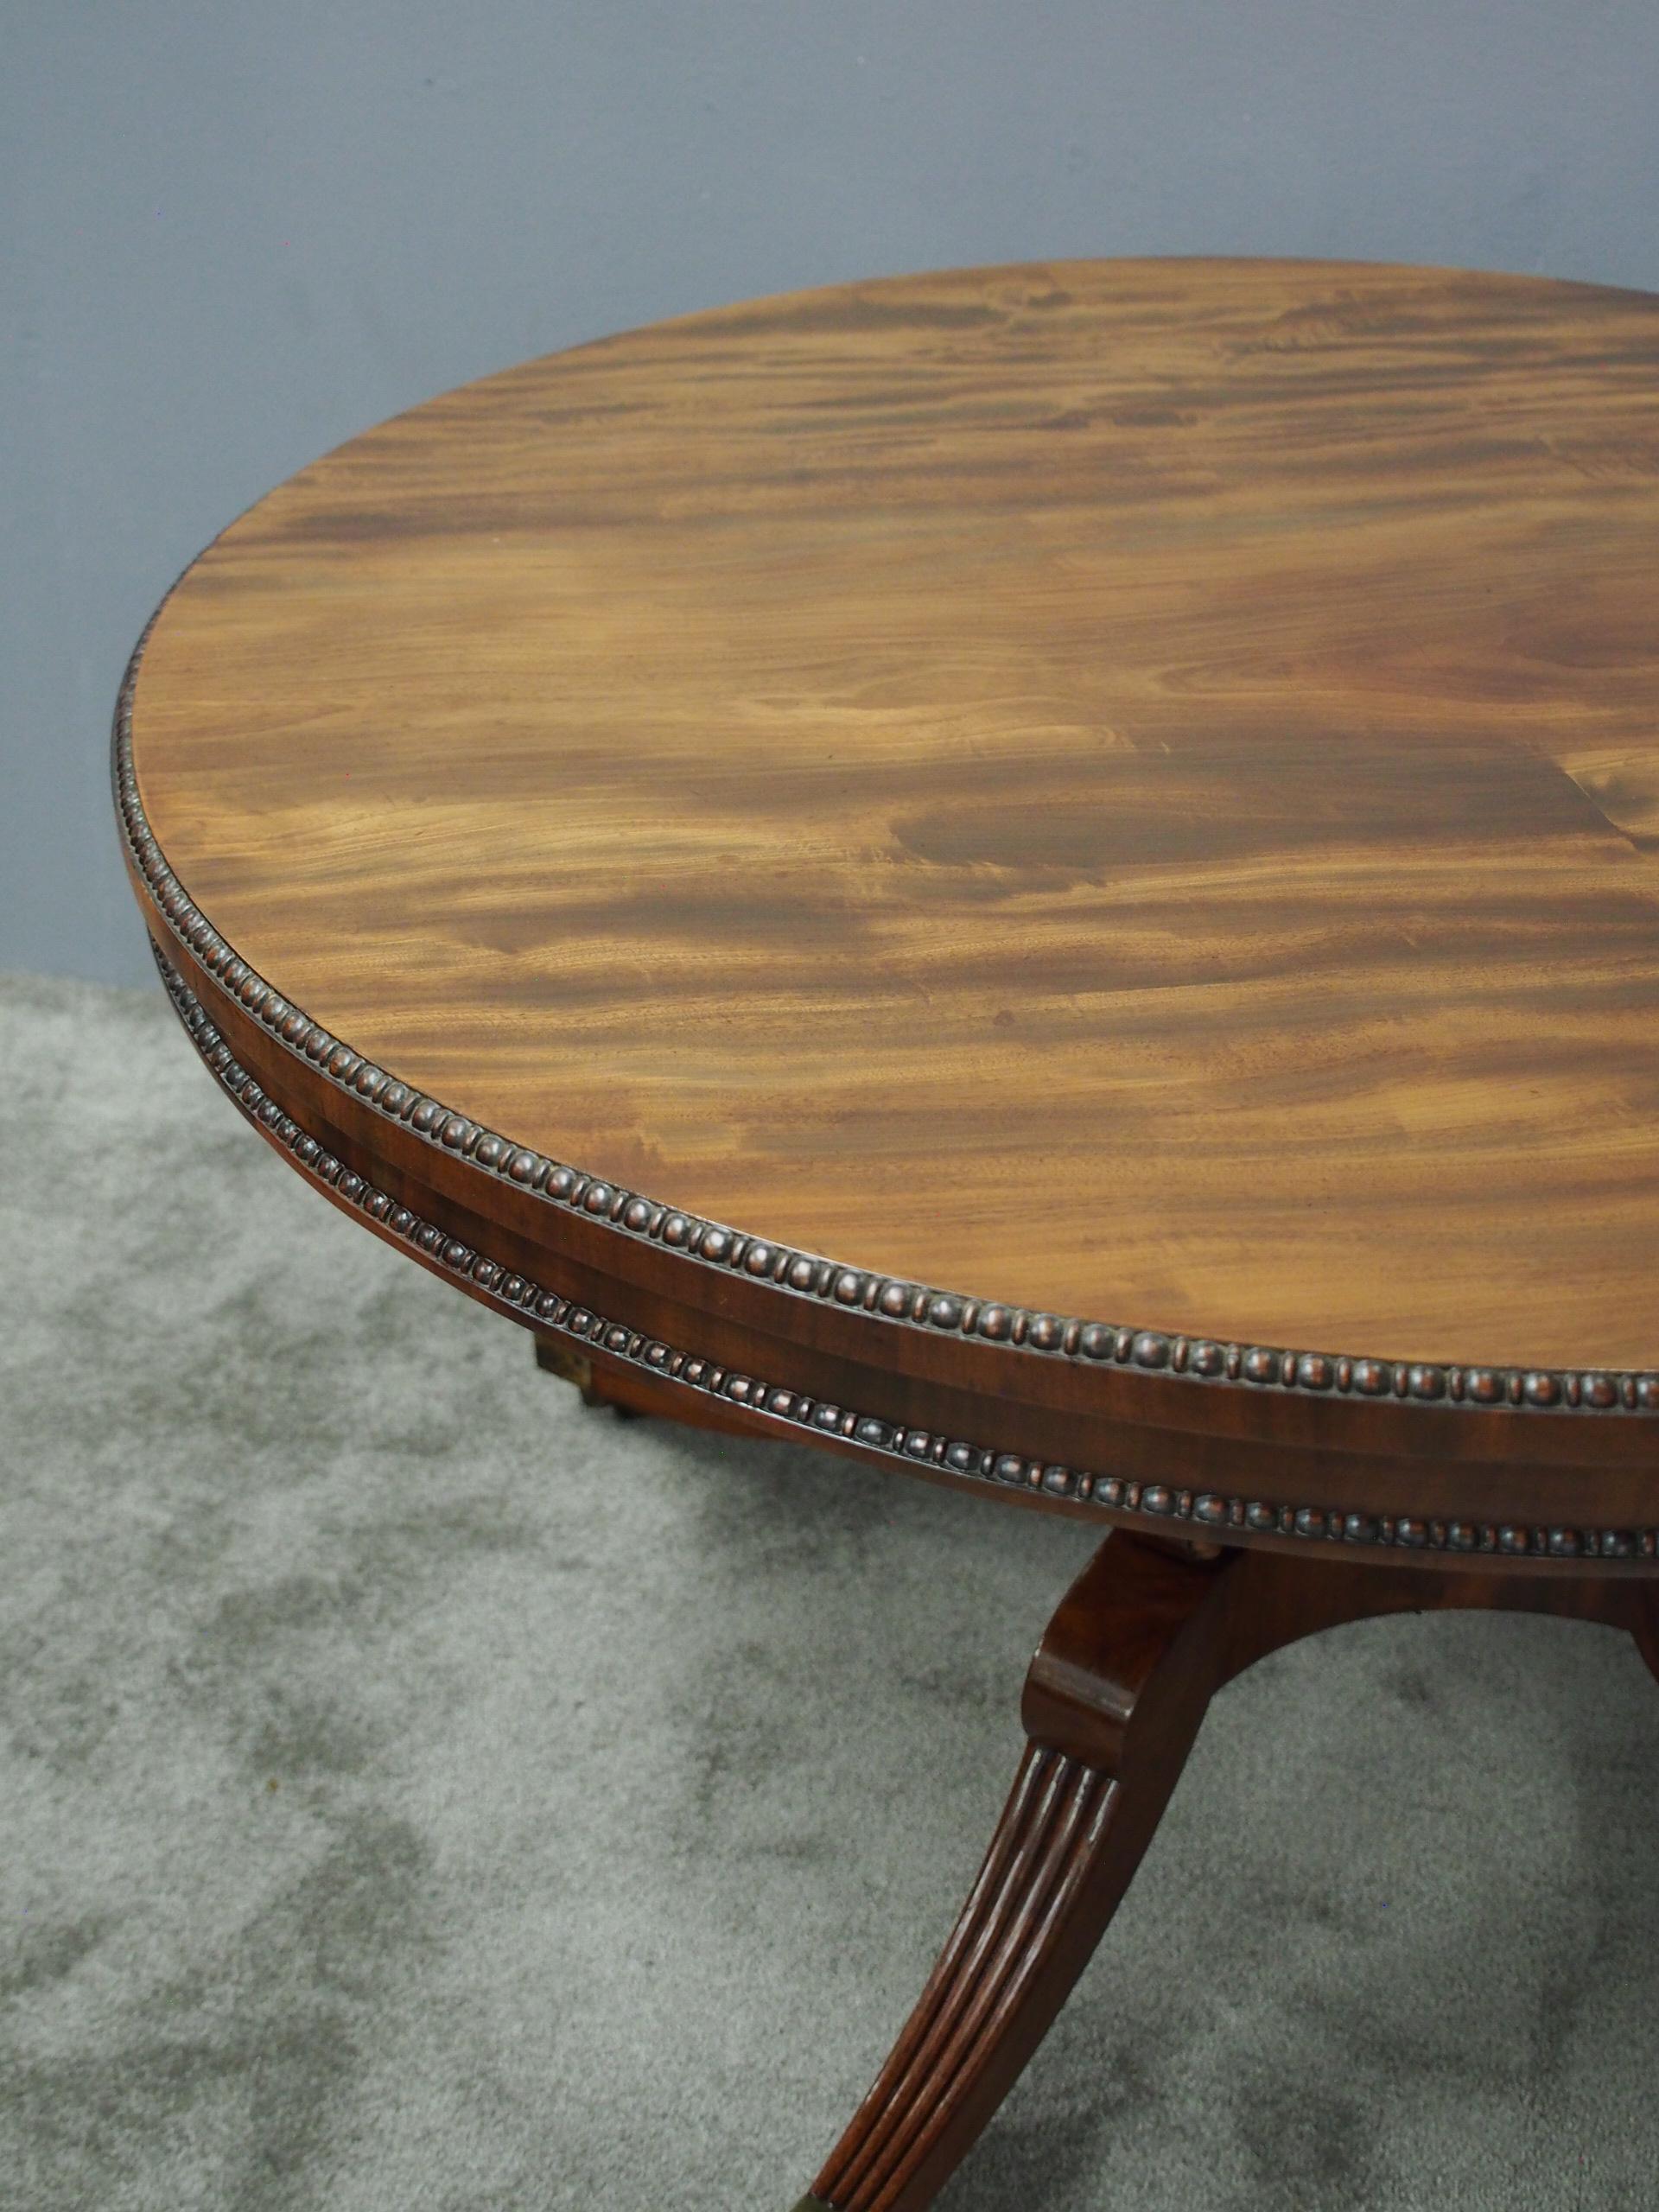 Regency William Trotter Style Mahogany Breakfast Table For Sale 2